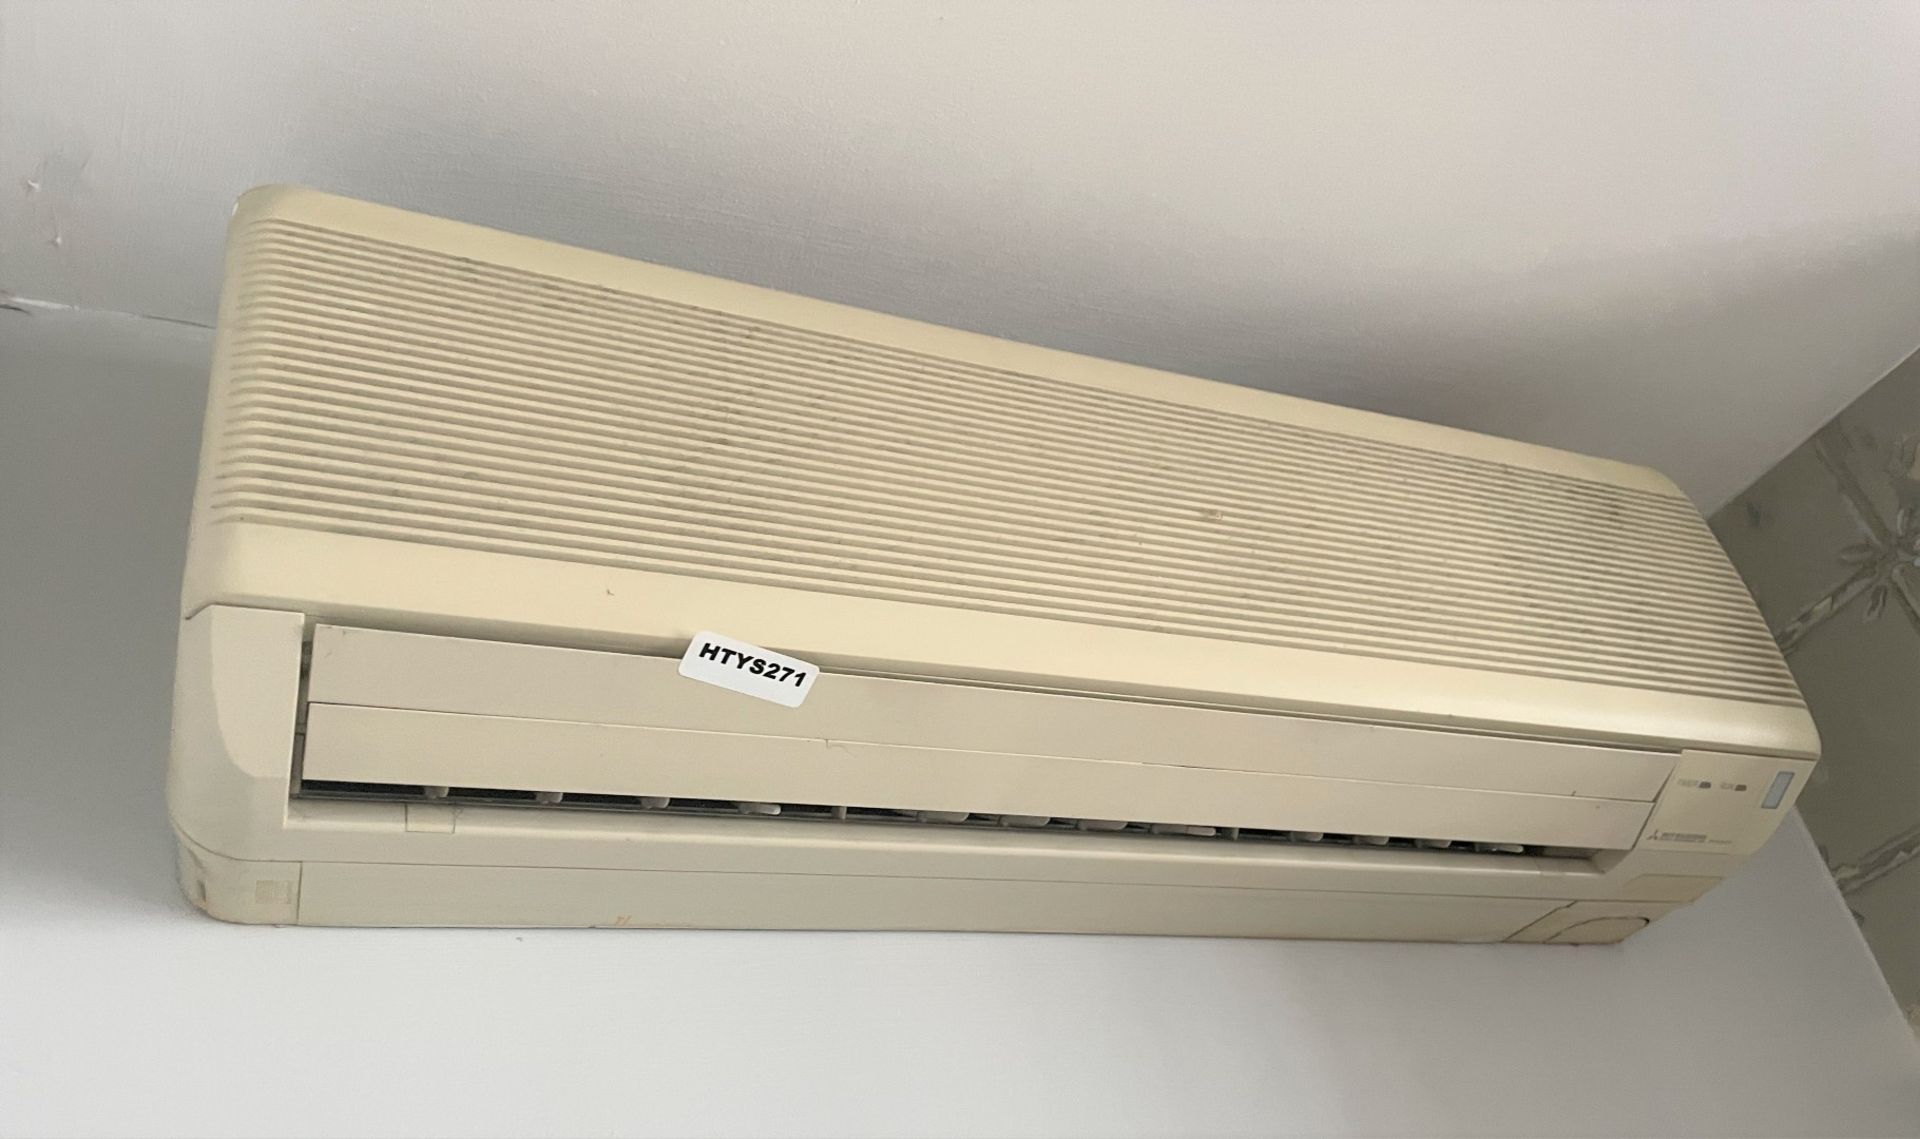 1 x Mitsubishi Split Type Air Conditioning Unit - Includes Indoor Unit and Outdoor Unit - Image 4 of 5